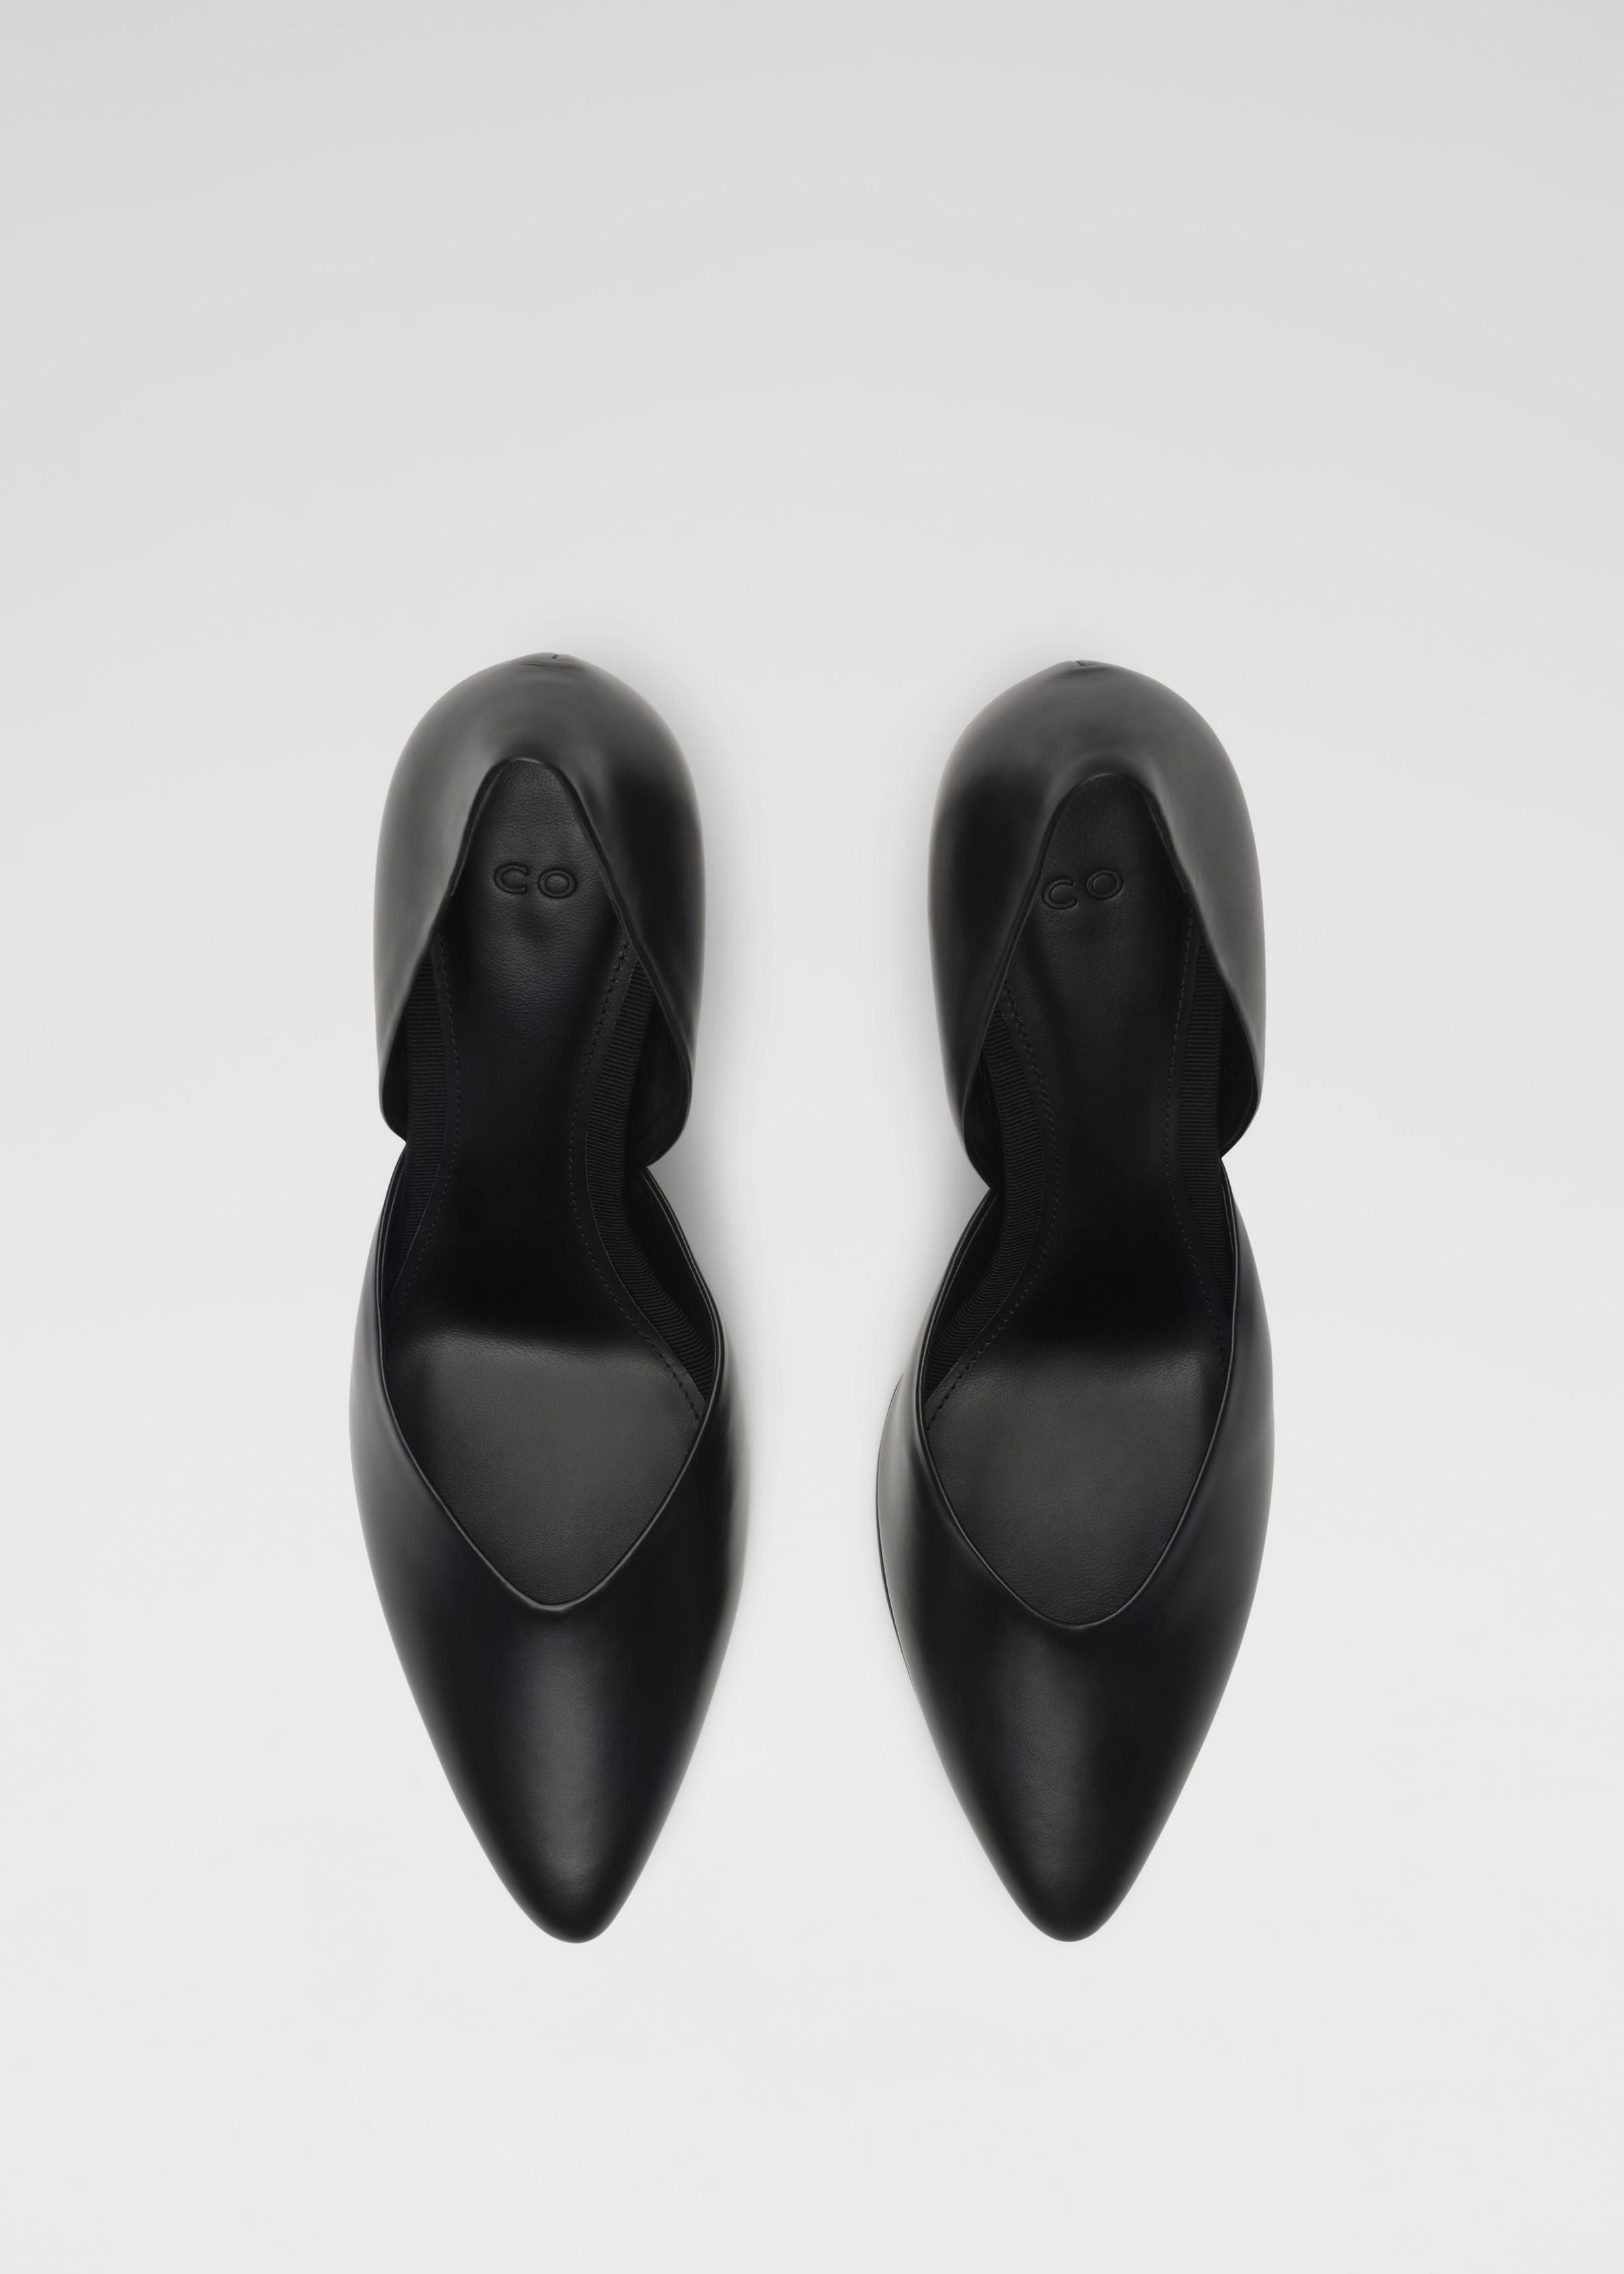 D'Orsay Stiletto Heel in Leather - Black - CO Collections